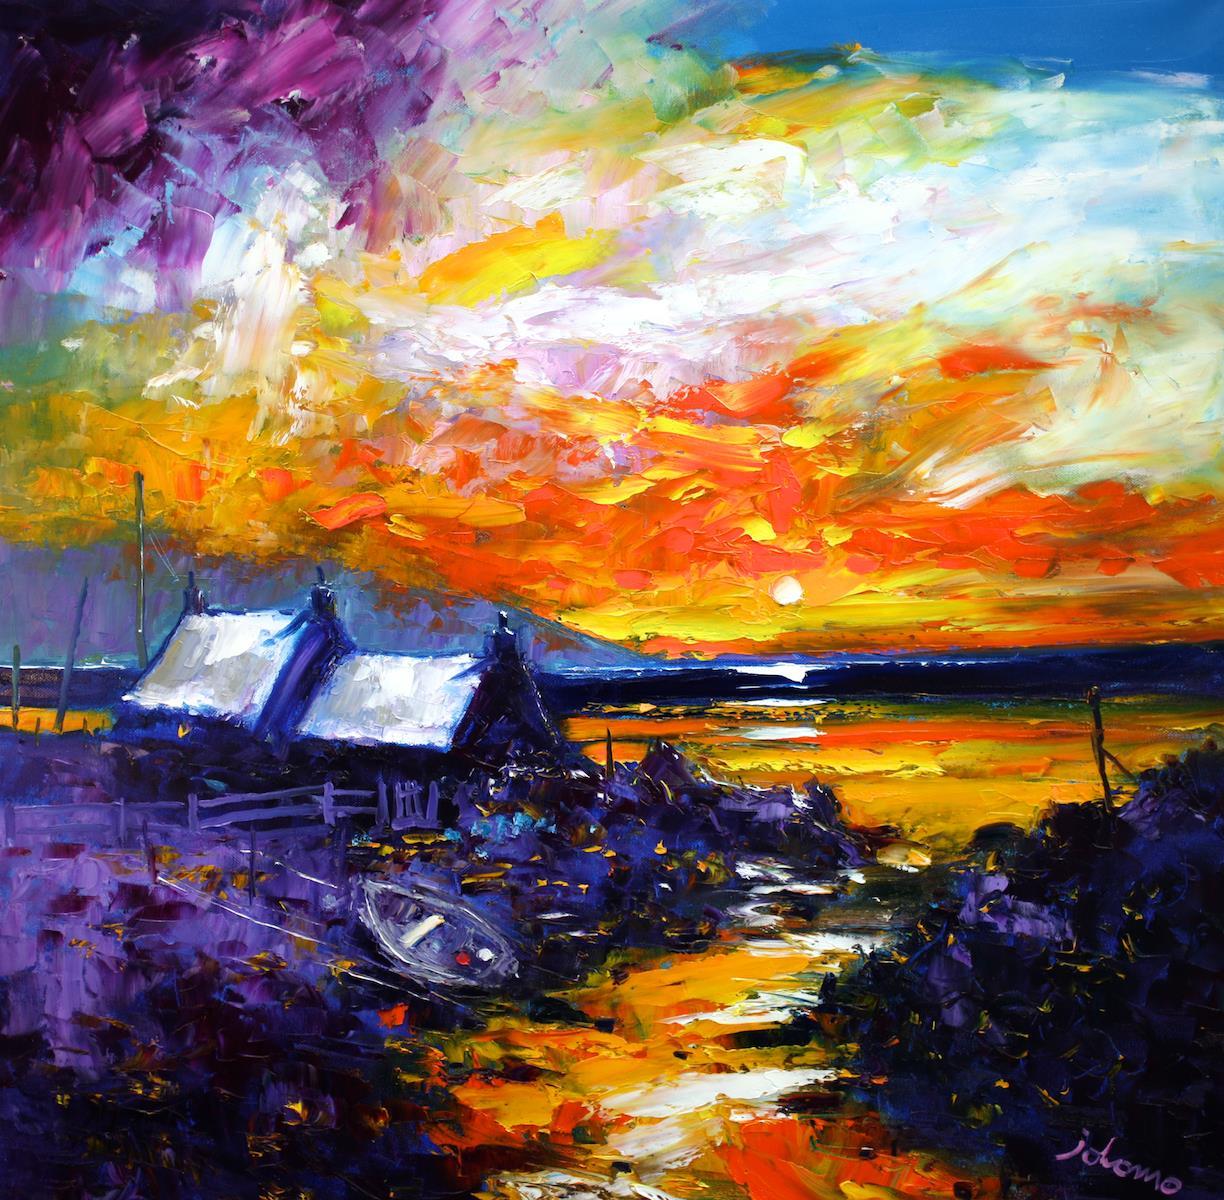 Jolomo has created an artwork that evokes sunset on the Mull of Kintyre.